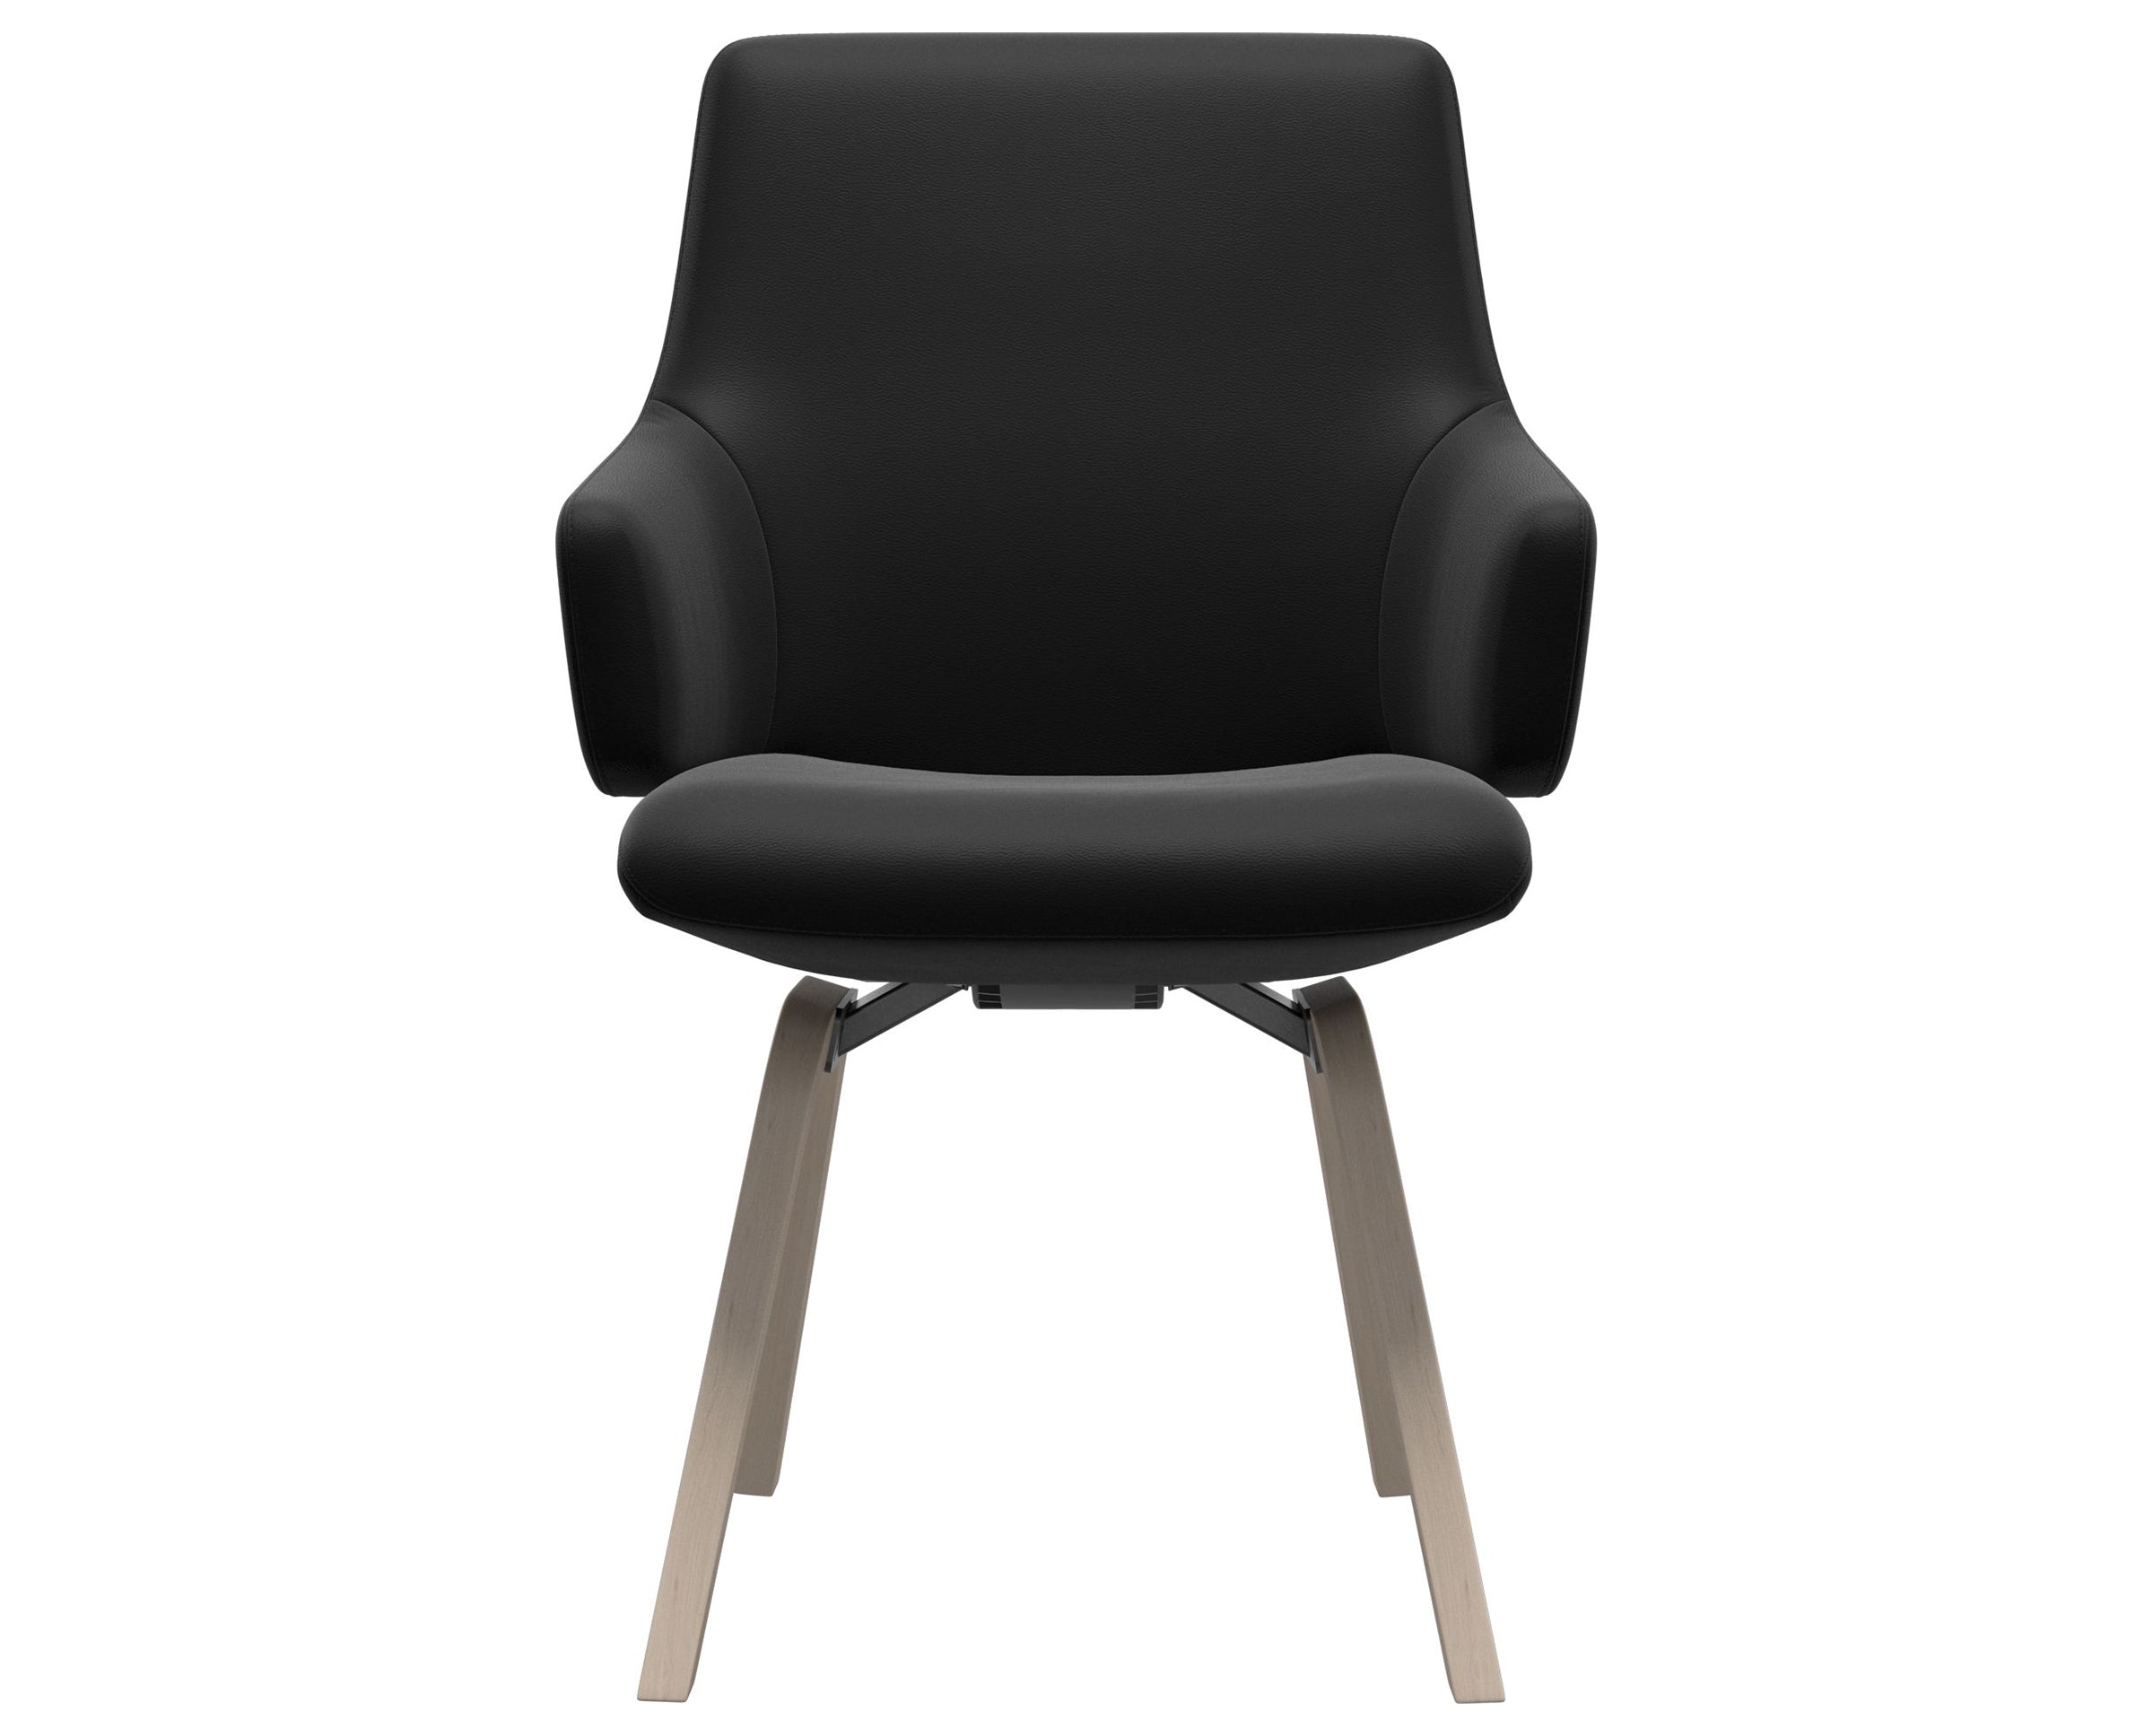 Paloma Leather Black and Whitewash Base | Stressless Laurel Low Back D200 Dining Chair w/Arms | Valley Ridge Furniture